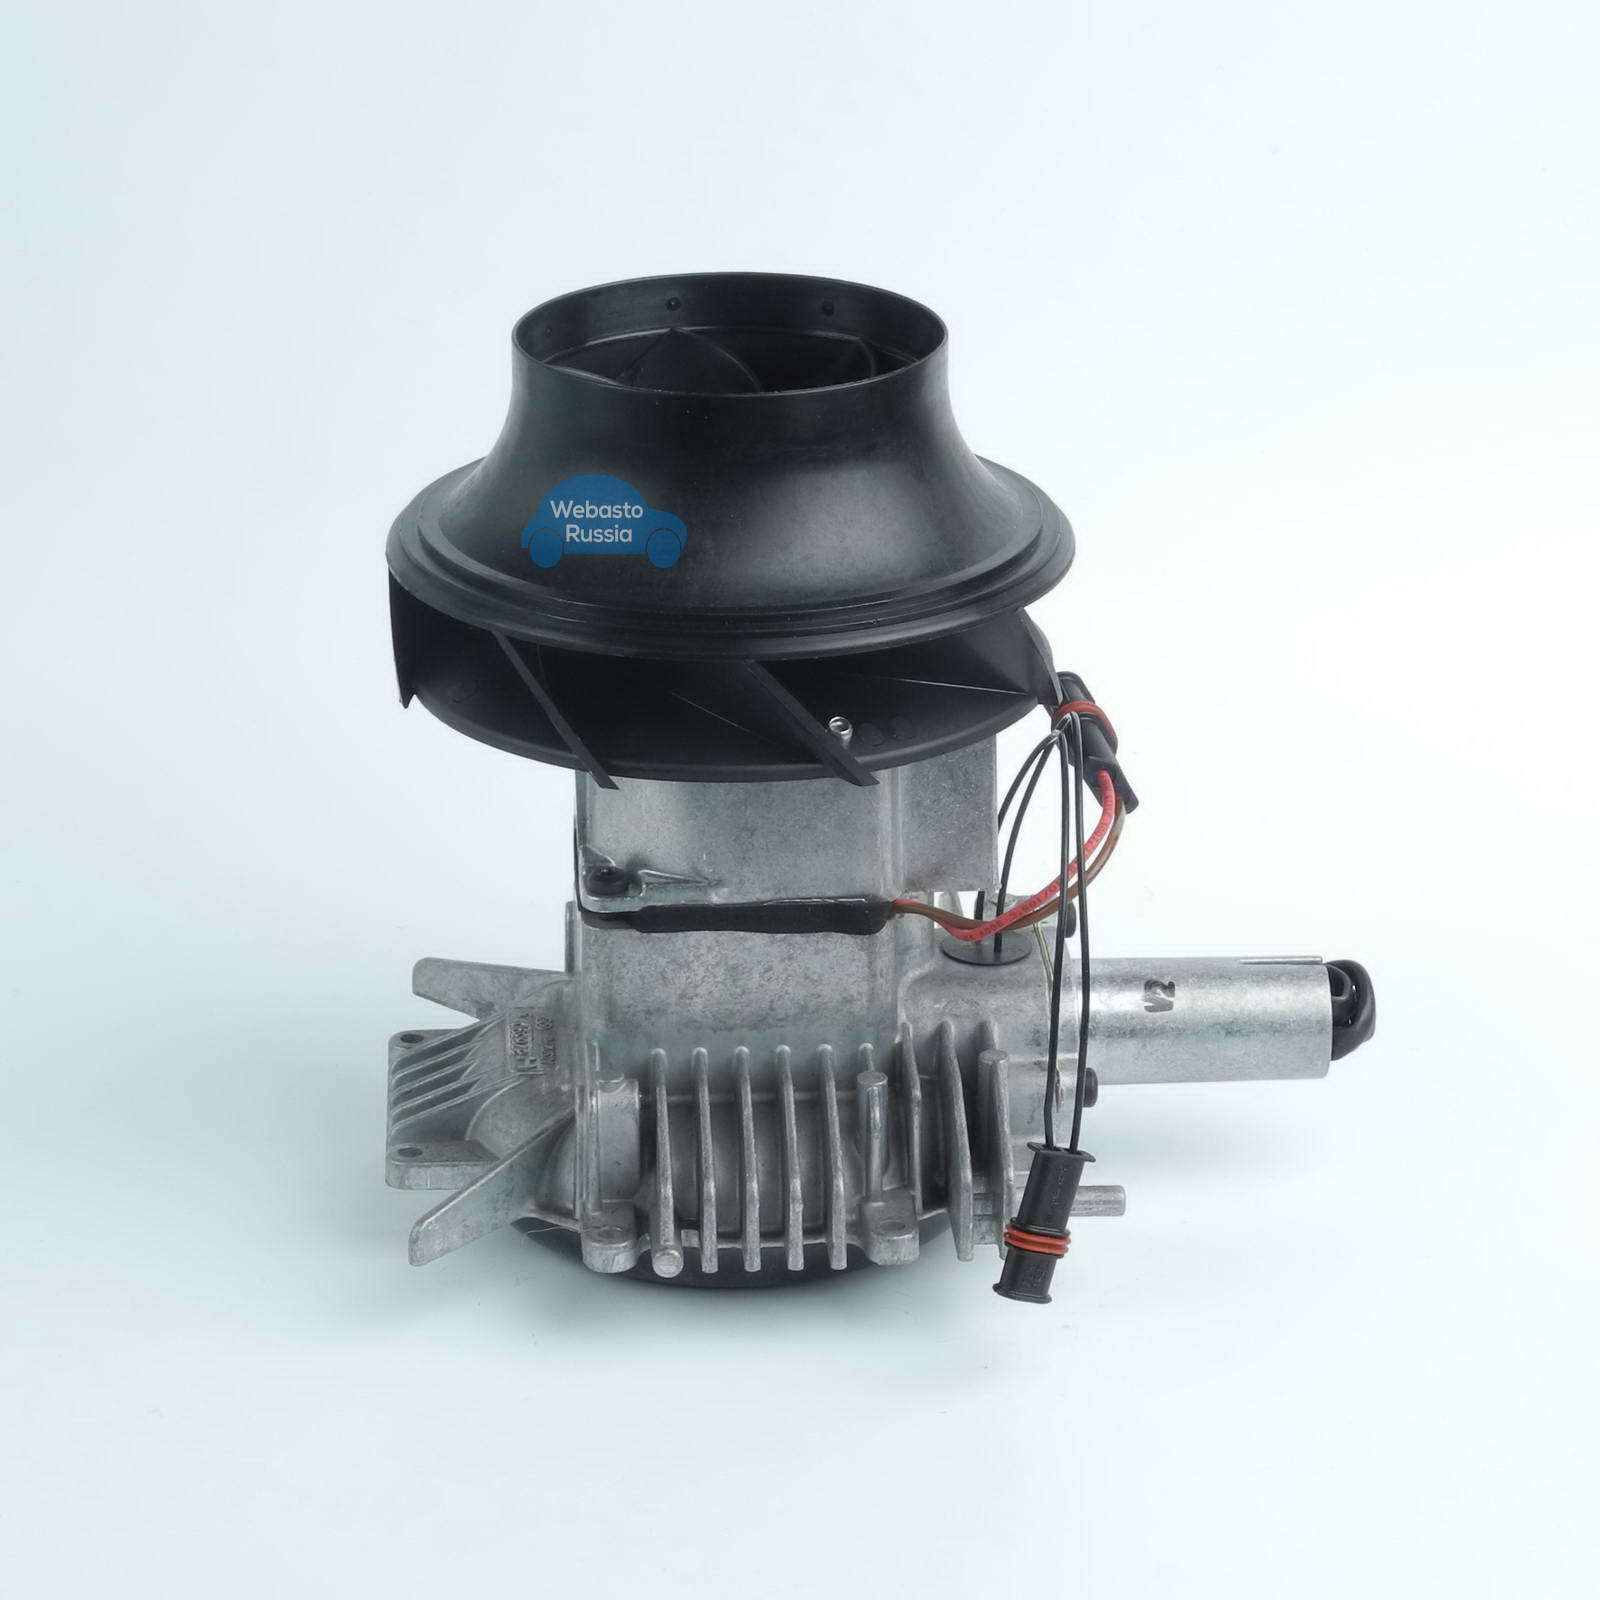 https://static.insales-cdn.com/images/products/1/3875/321613603/air-blower-webasto-air-top-3500-st-24v-aftermarket-1x1-1.jpg